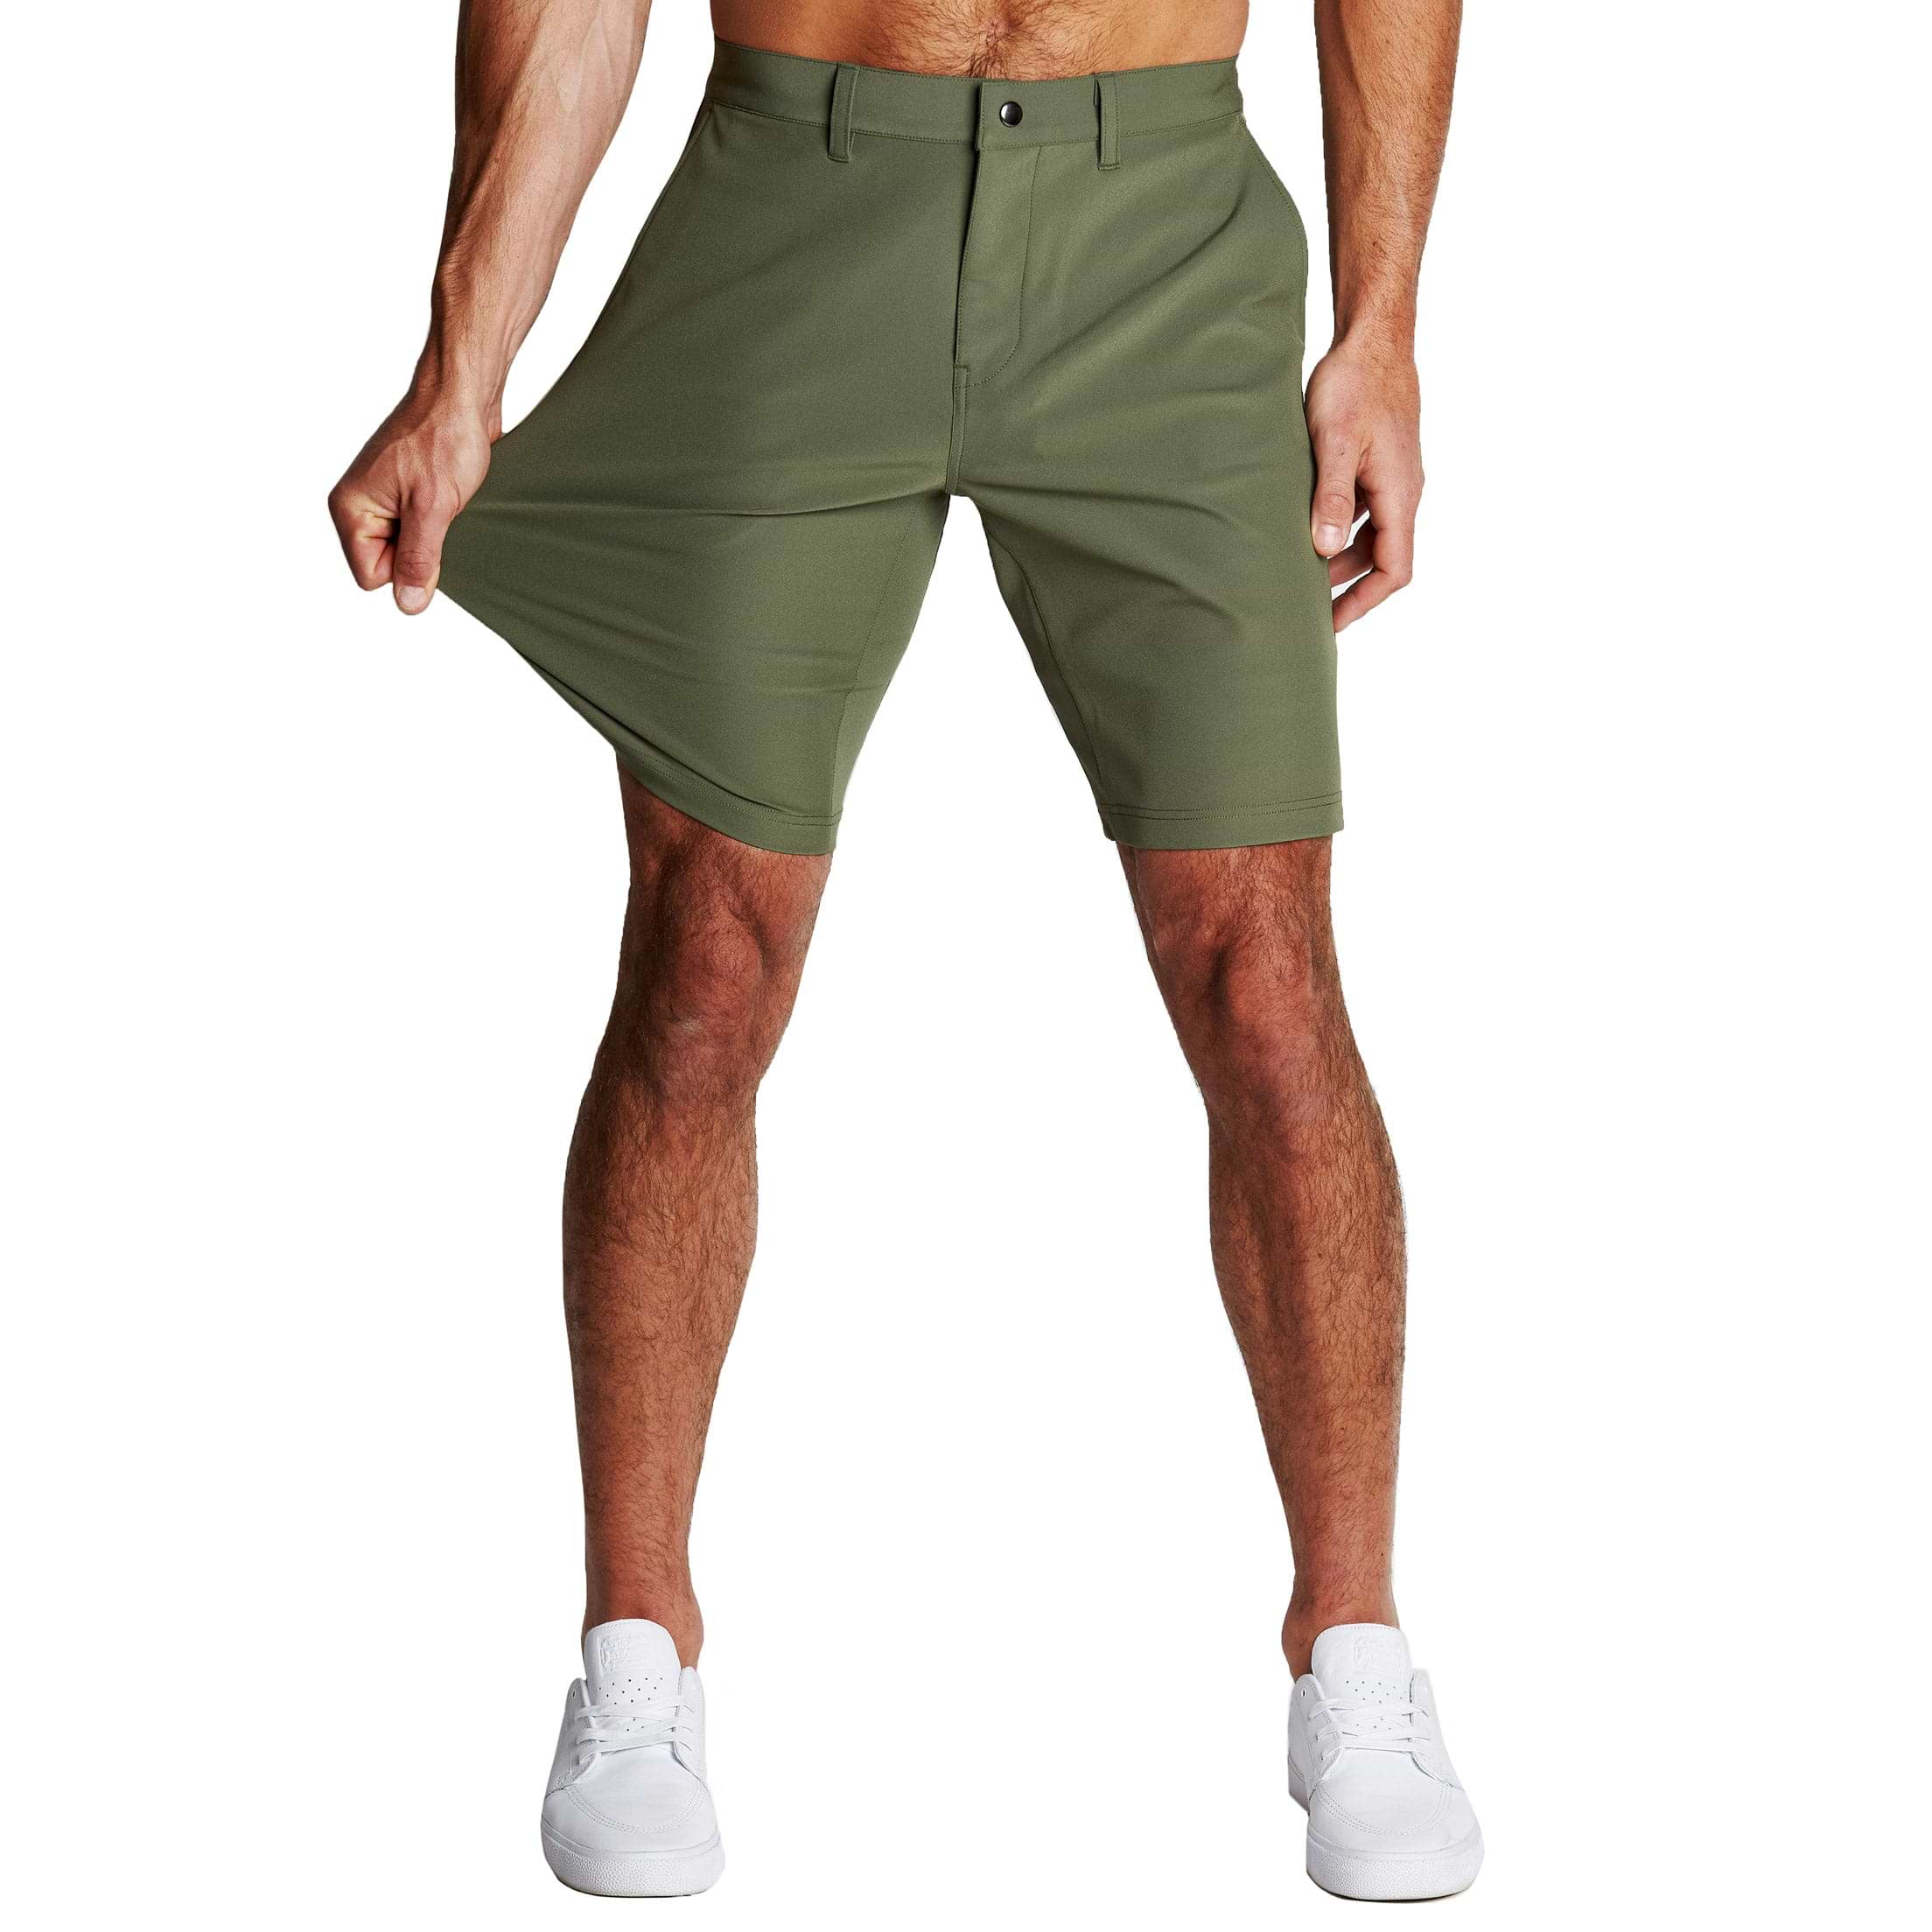 Athletic Fit Shorts - Olive